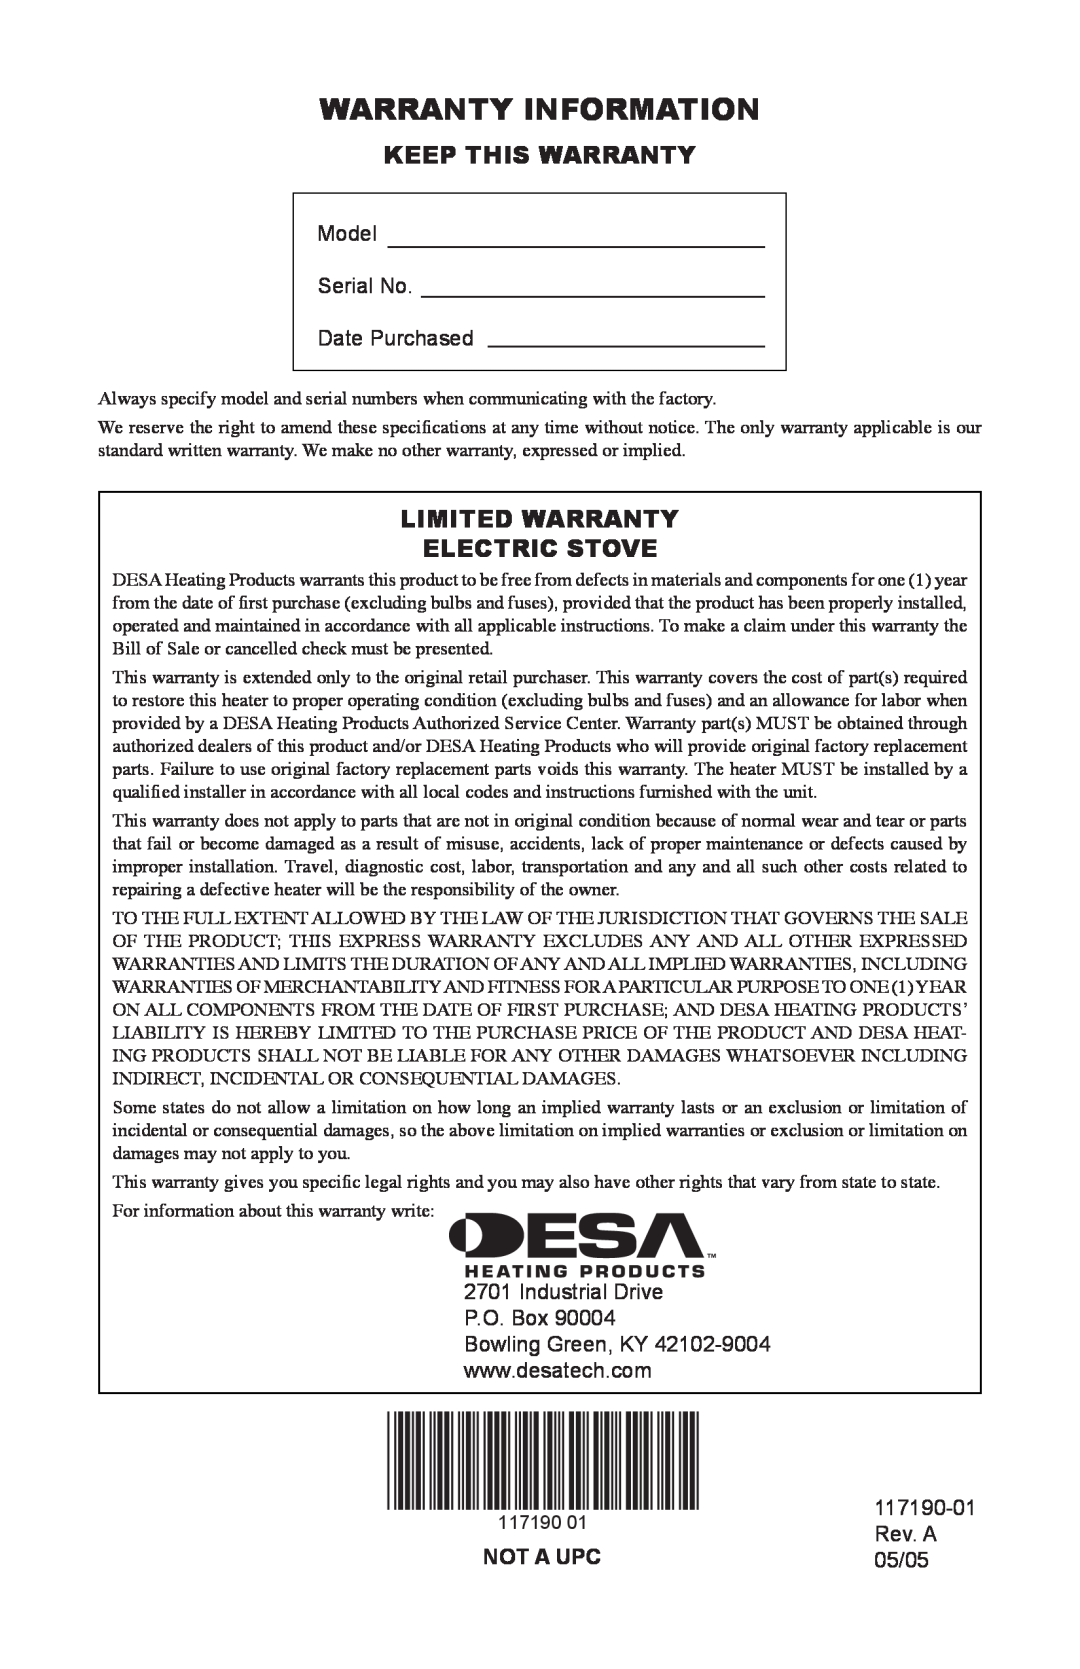 Desa CGESBL Warranty Information, Model Serial No Date Purchased, Industrial Drive P.O. Box, Rev. A, Not A Upc, 05/05 